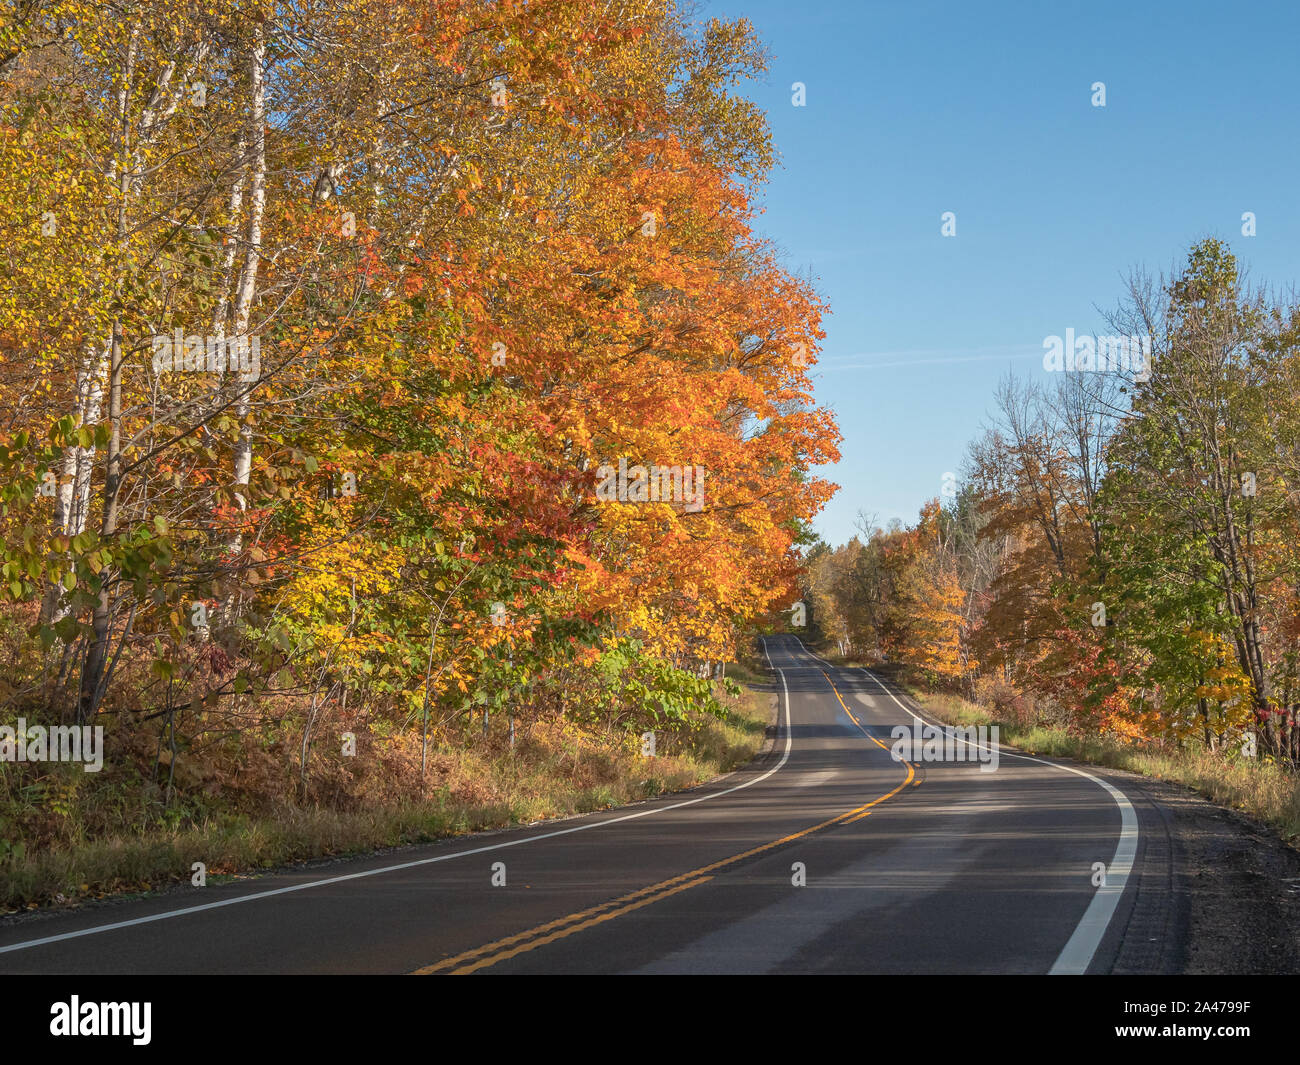 Colorful yellow and orange leaves line a two-lane road winding through the northern woods on a sunny fall day in the United States. Stock Photo